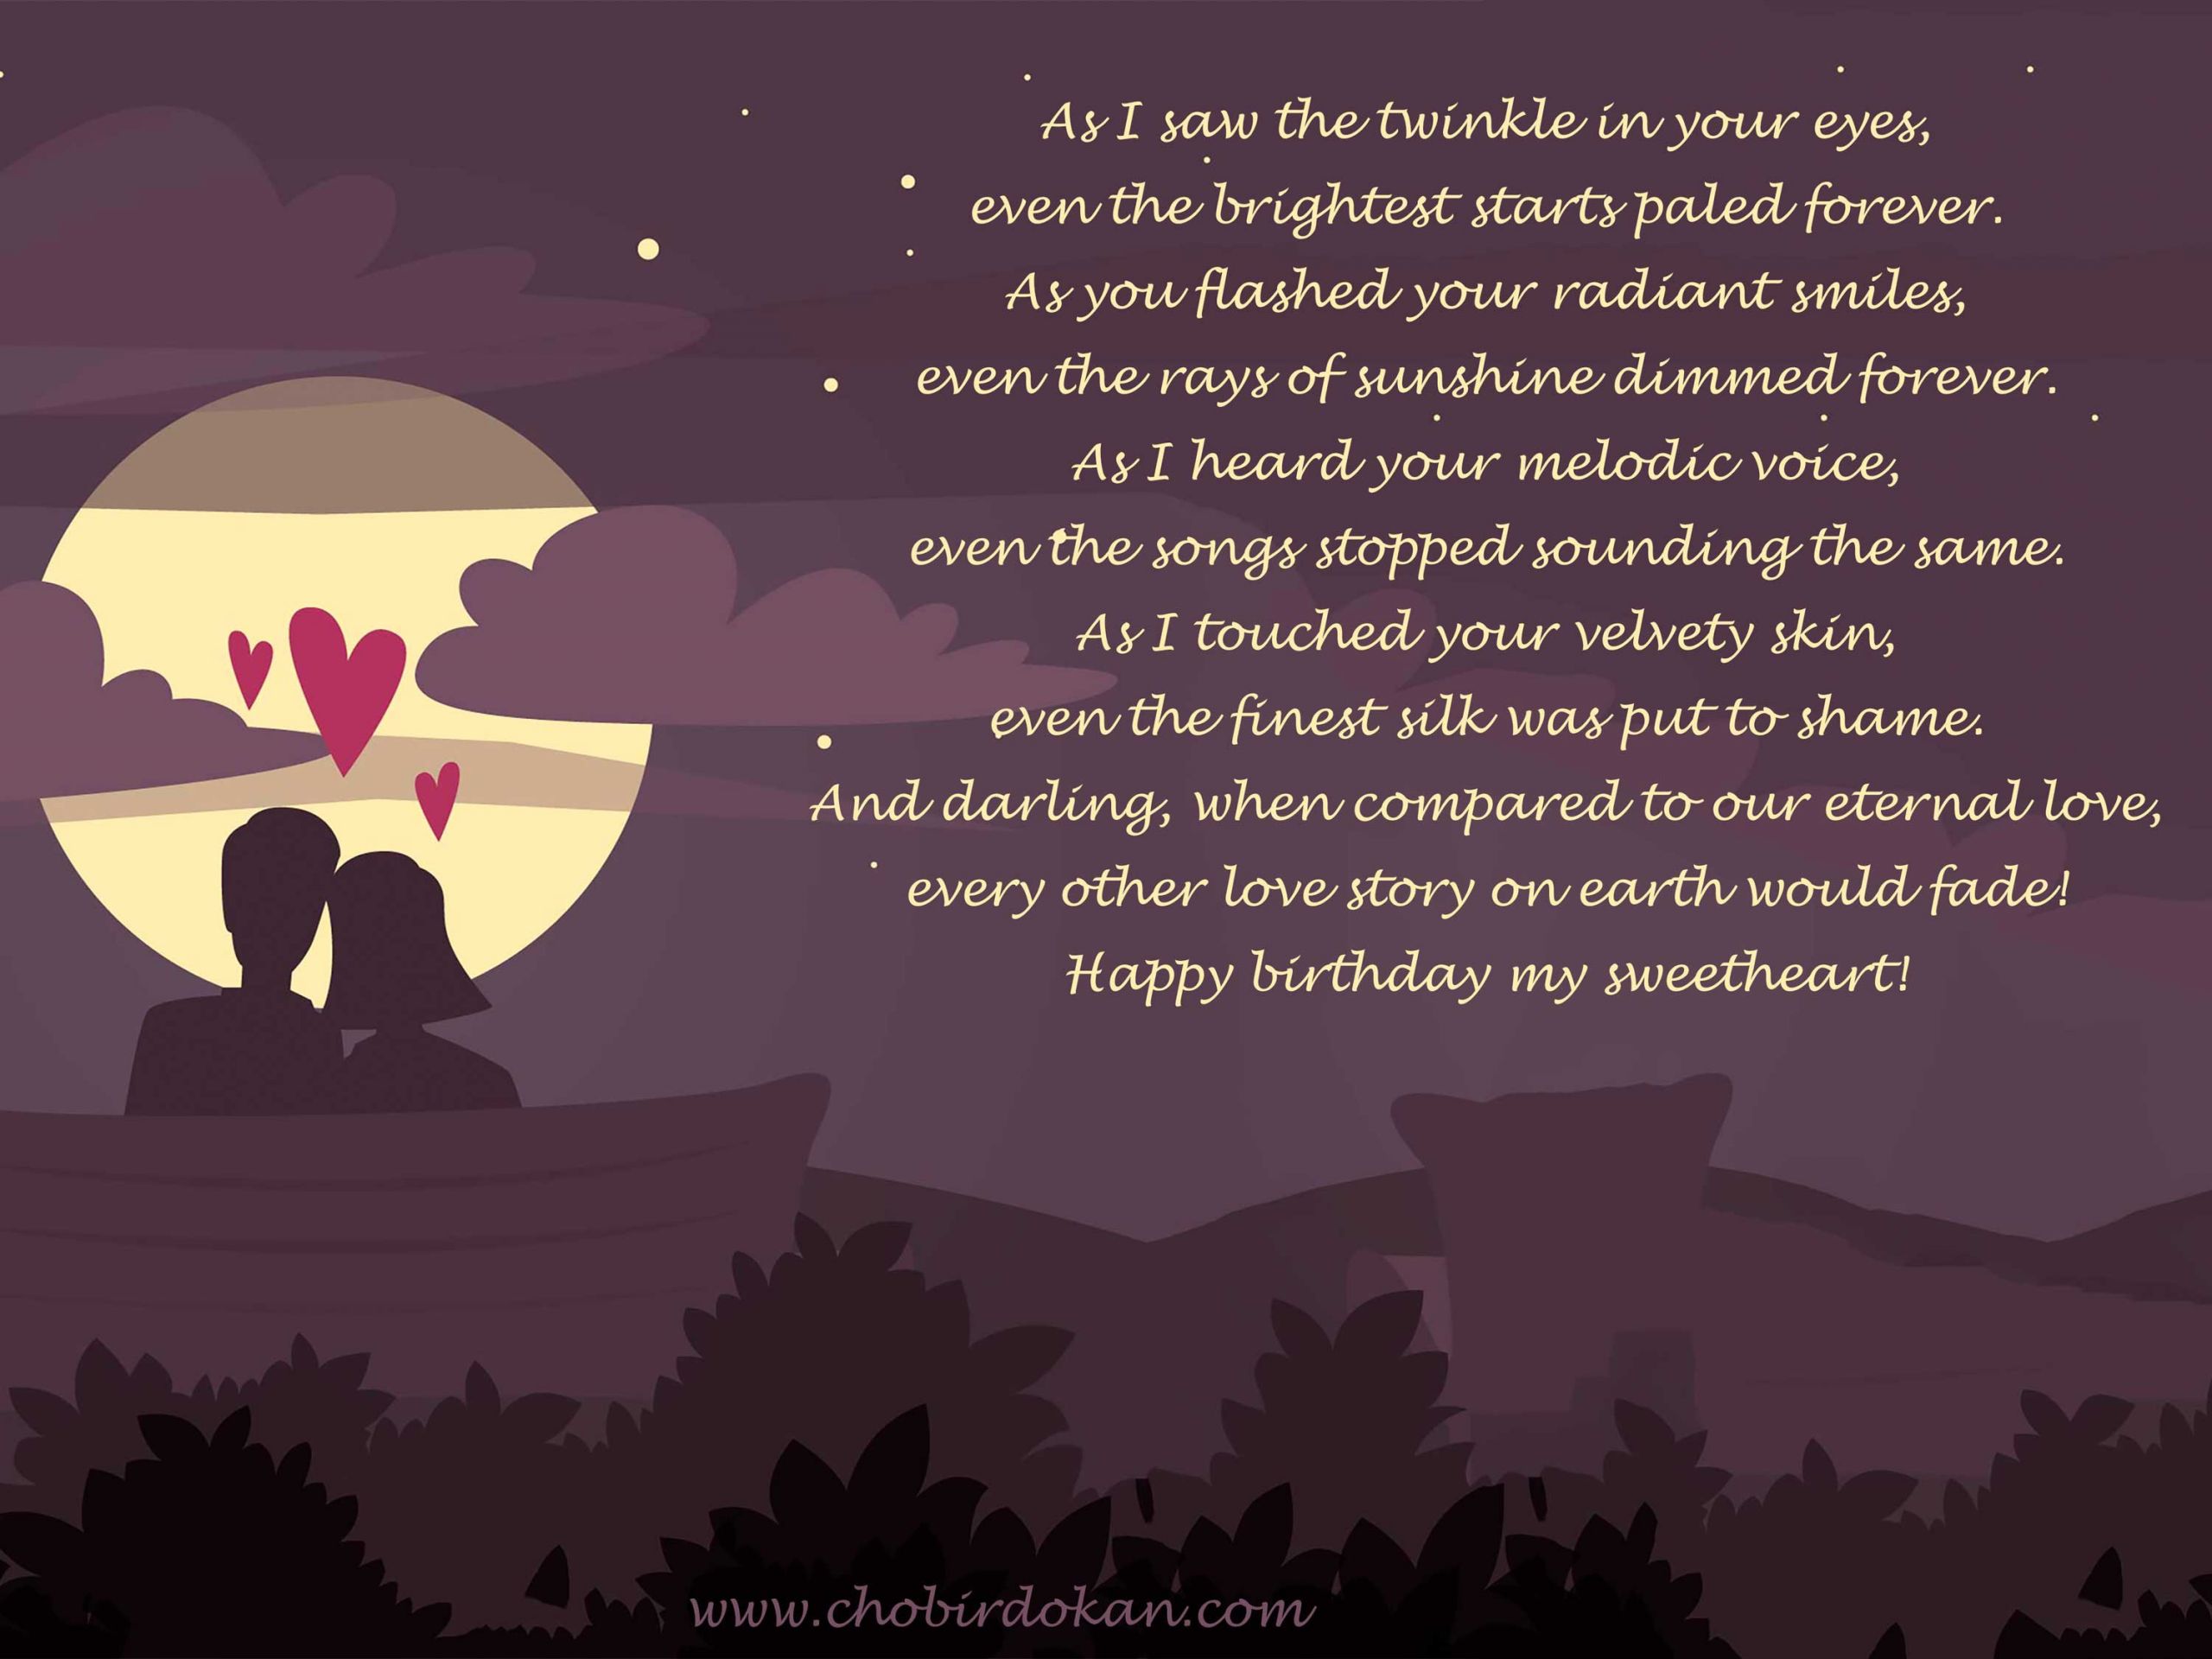 Romantic Birthday Quotes For Girlfriend
 Romantic Happy Birthday Poems For Her For Girlfriend or